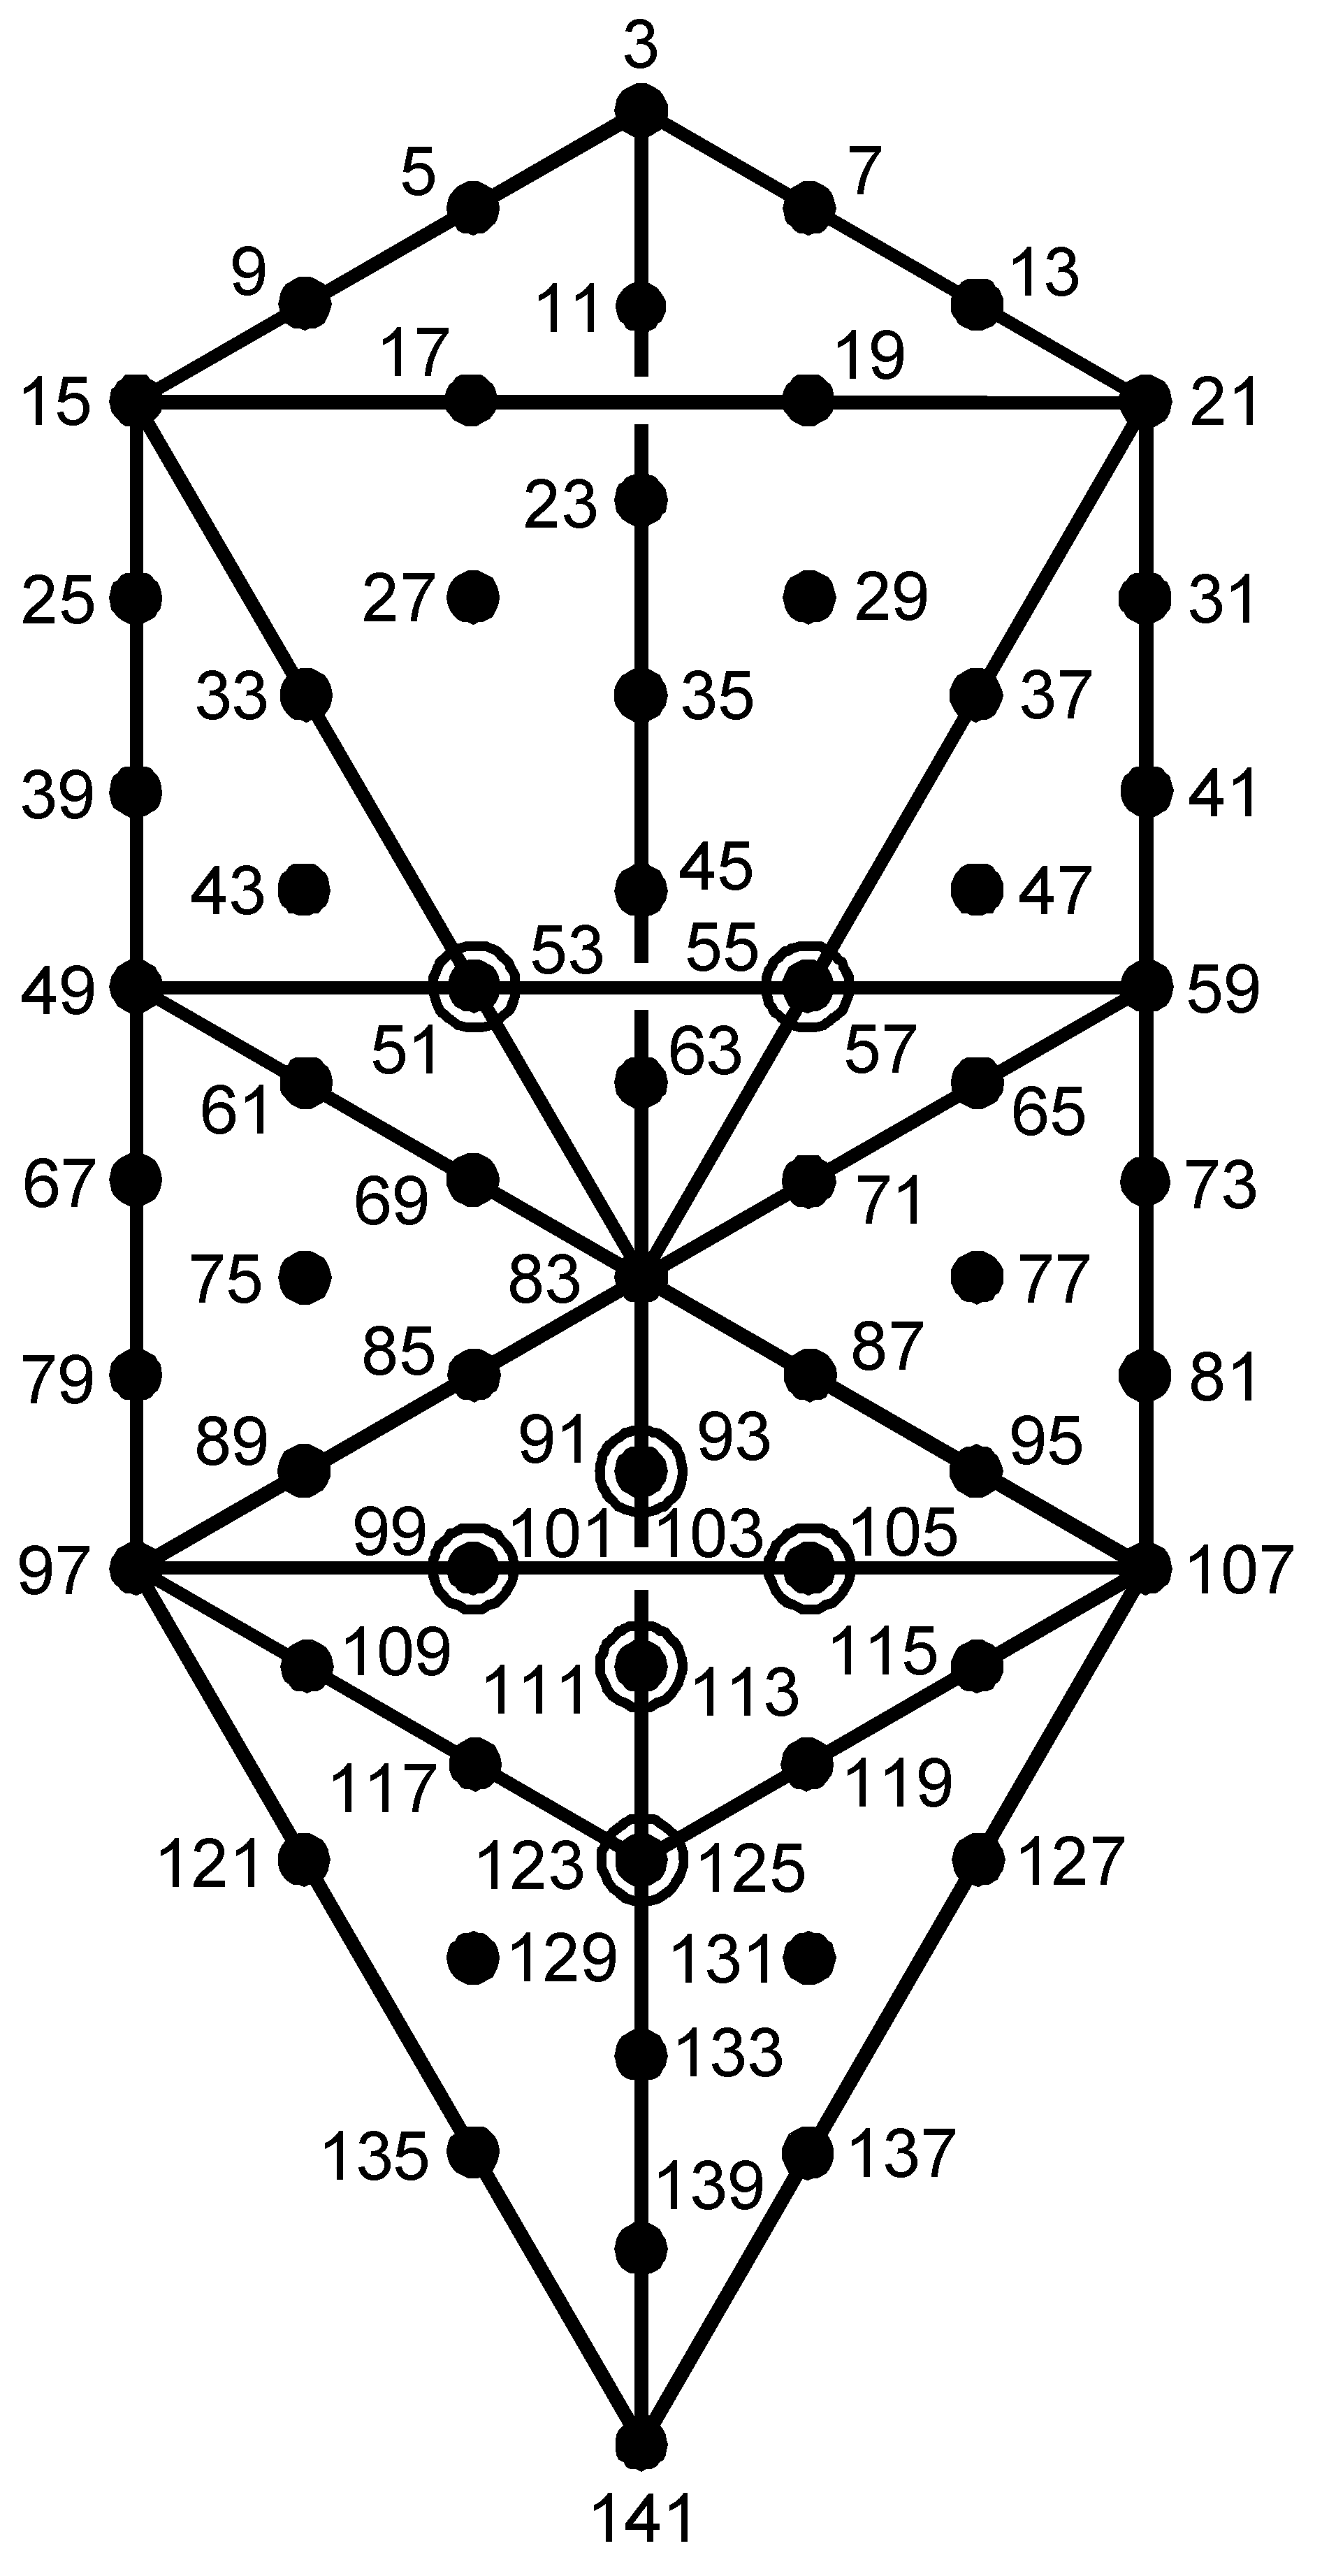 5040 as sum of 70 integers assigned to Tree of Life